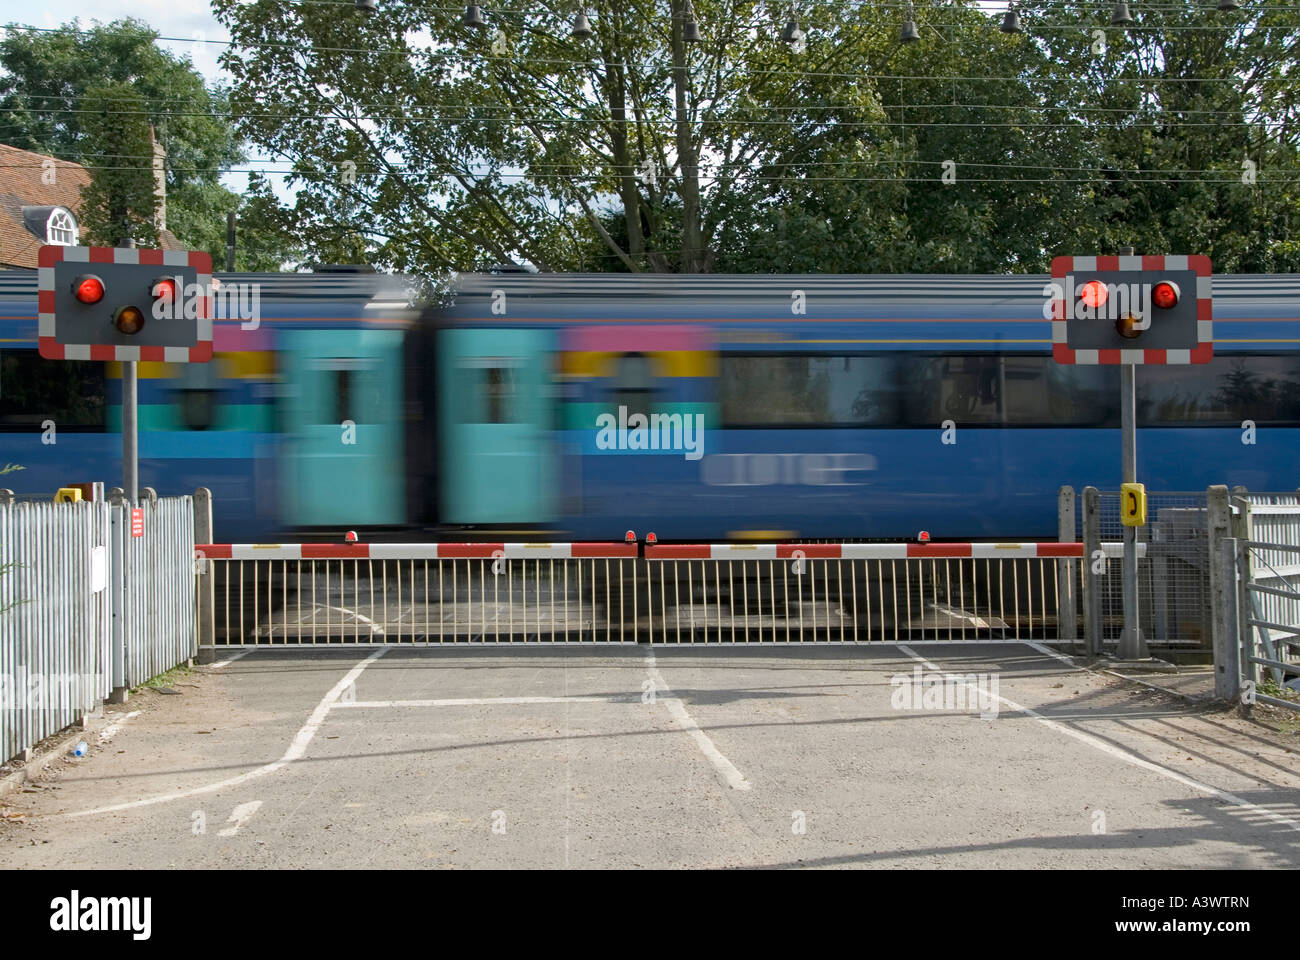 Transport Railway Line Red Flashing Warning Light Sign Level Crossing Barrier Gate Country Road Passenger Train Carriages Motion Blur Essex England Uk Stock Photo Alamy